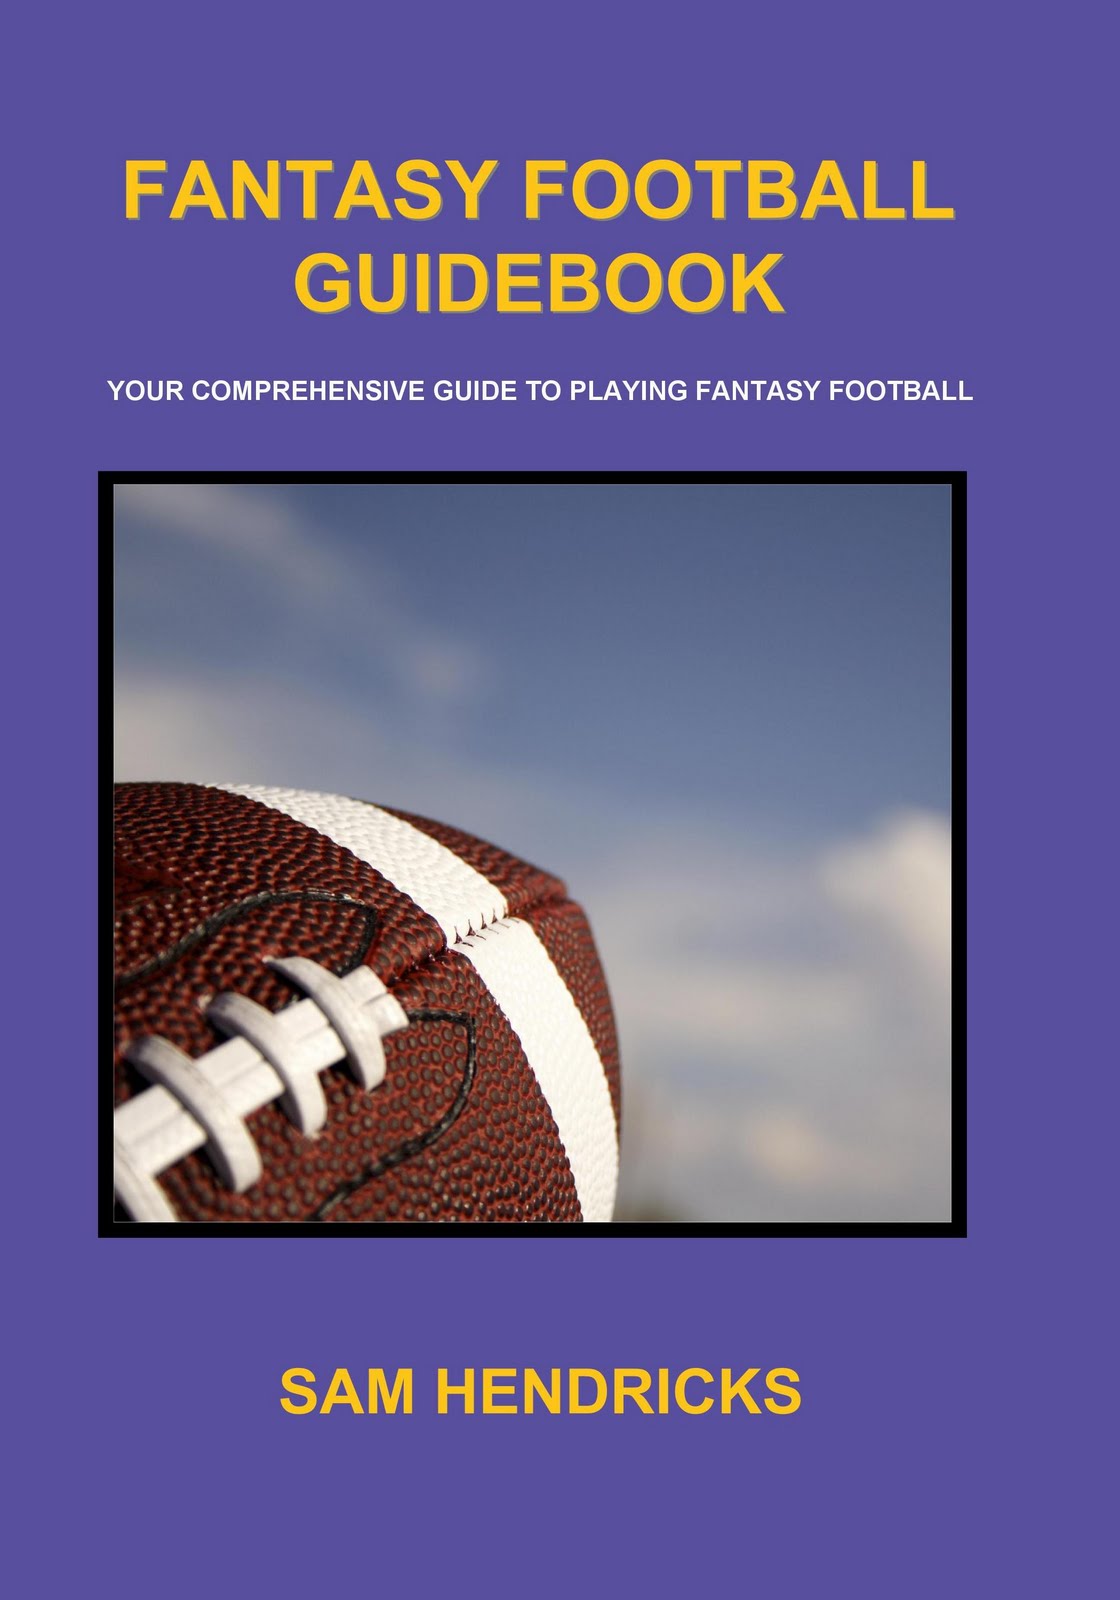 Fantasy Football Guidebook Two of the three Best Selling Books at